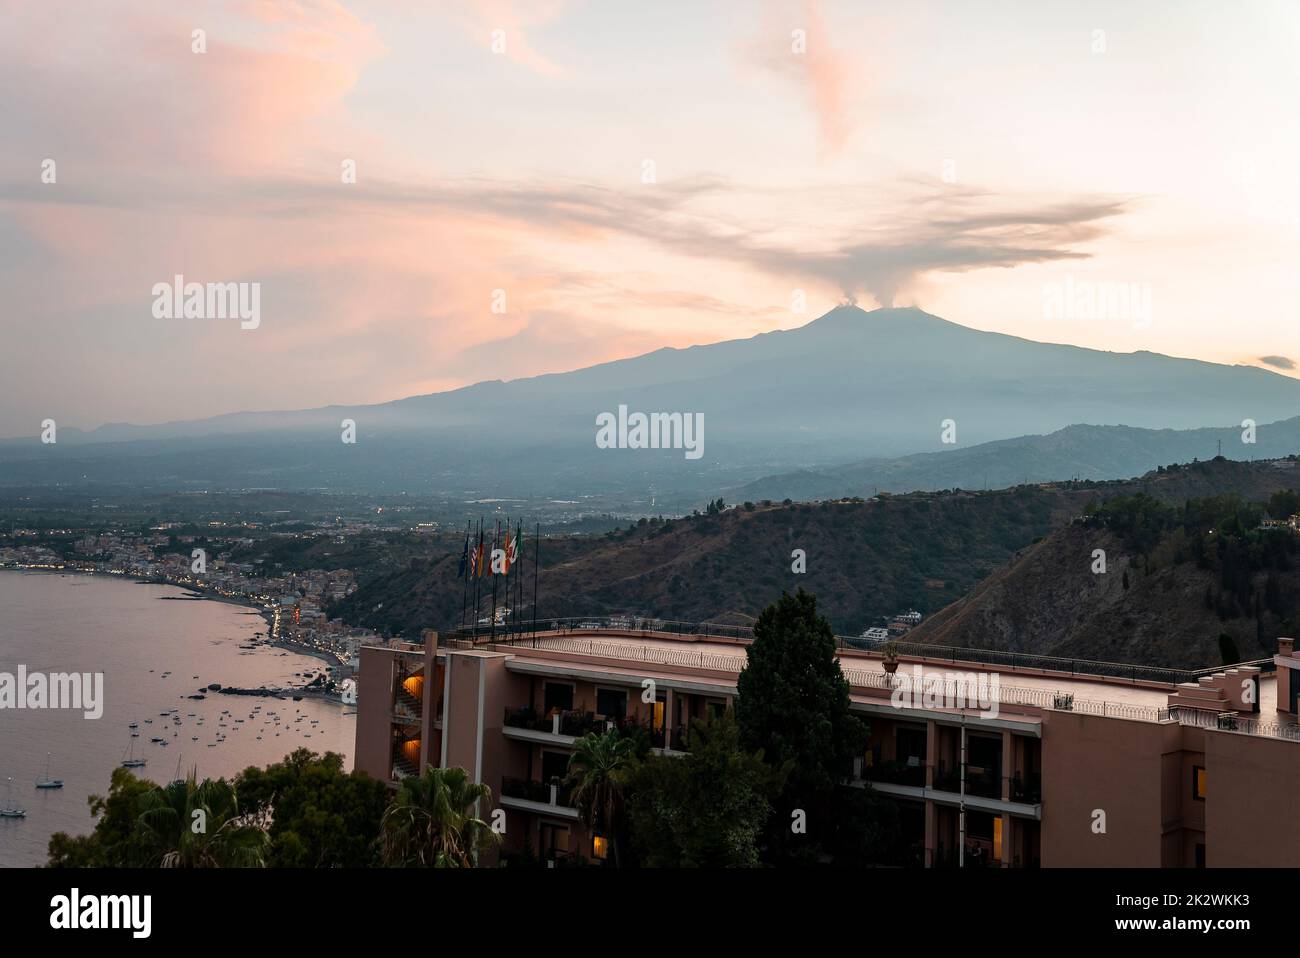 View of Hotel Elios overlooking volcanic Mount Etna with sky in background Stock Photo